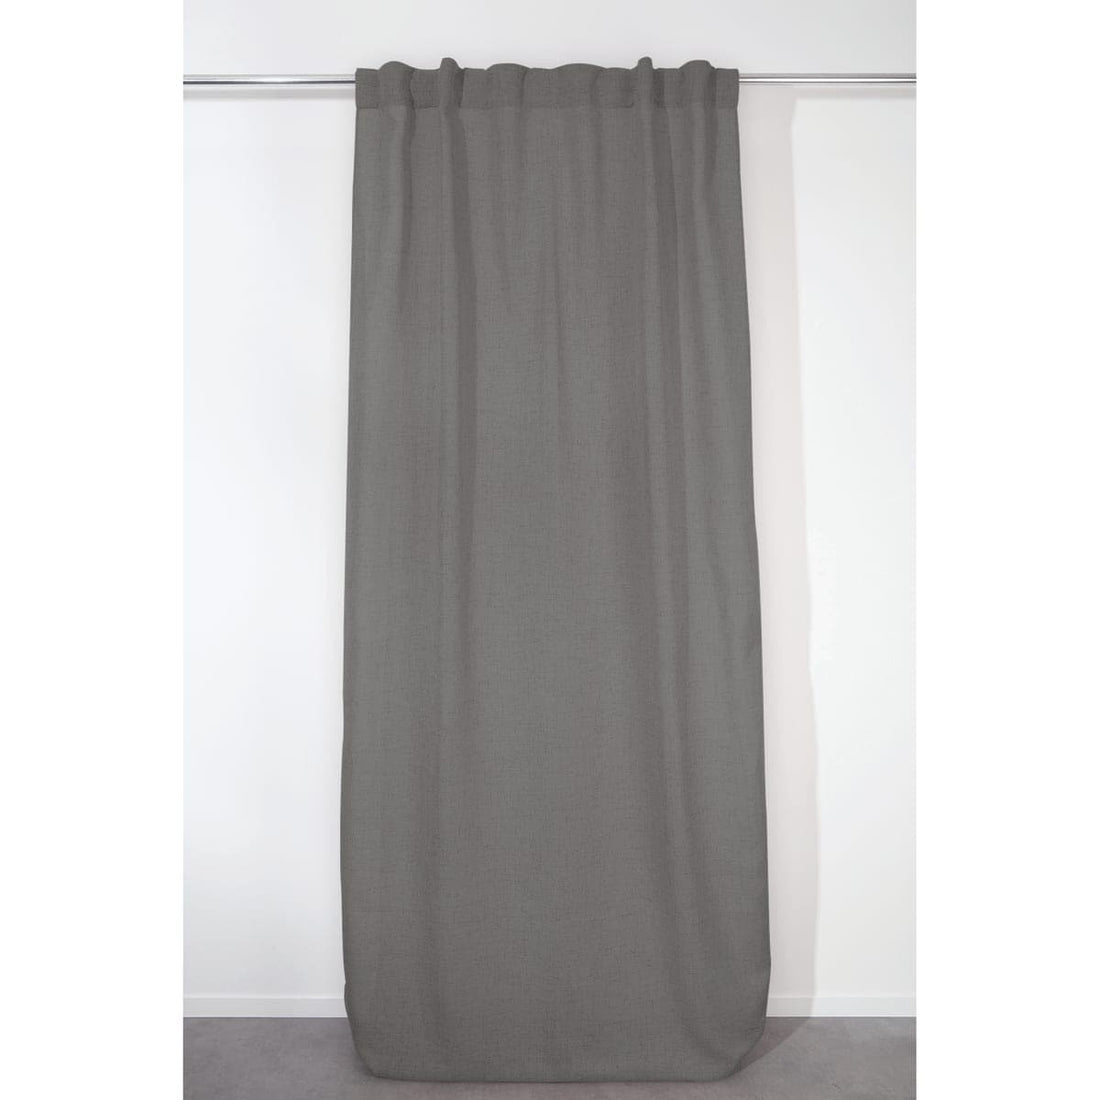 COLOSO DARK GREY OPAQUE CURTAIN 135X280 CM WITH LOOP AND WEBBING - best price from Maltashopper.com BR480008002